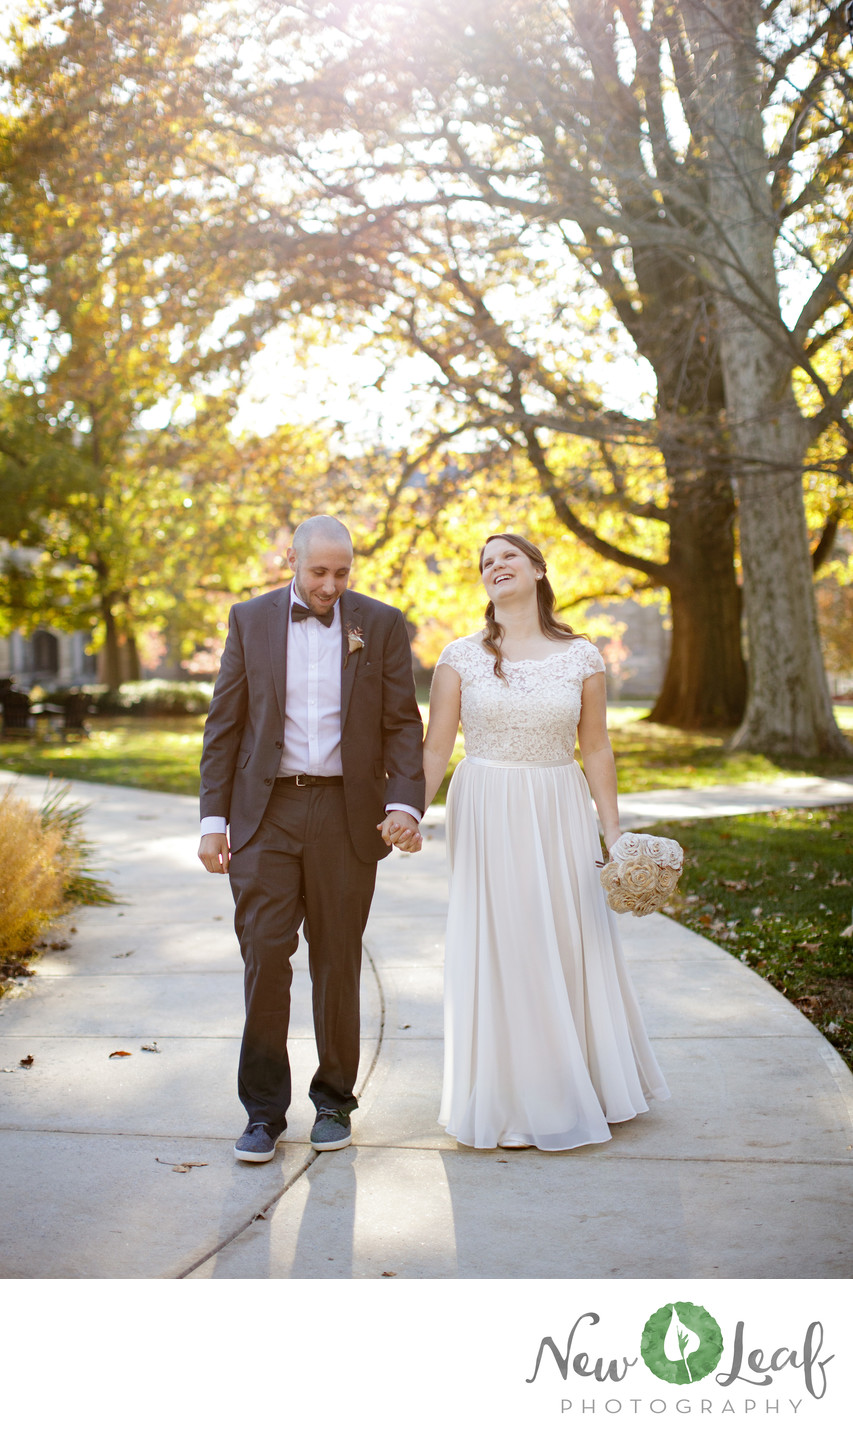 Wedding Photographers in West Chester, PA